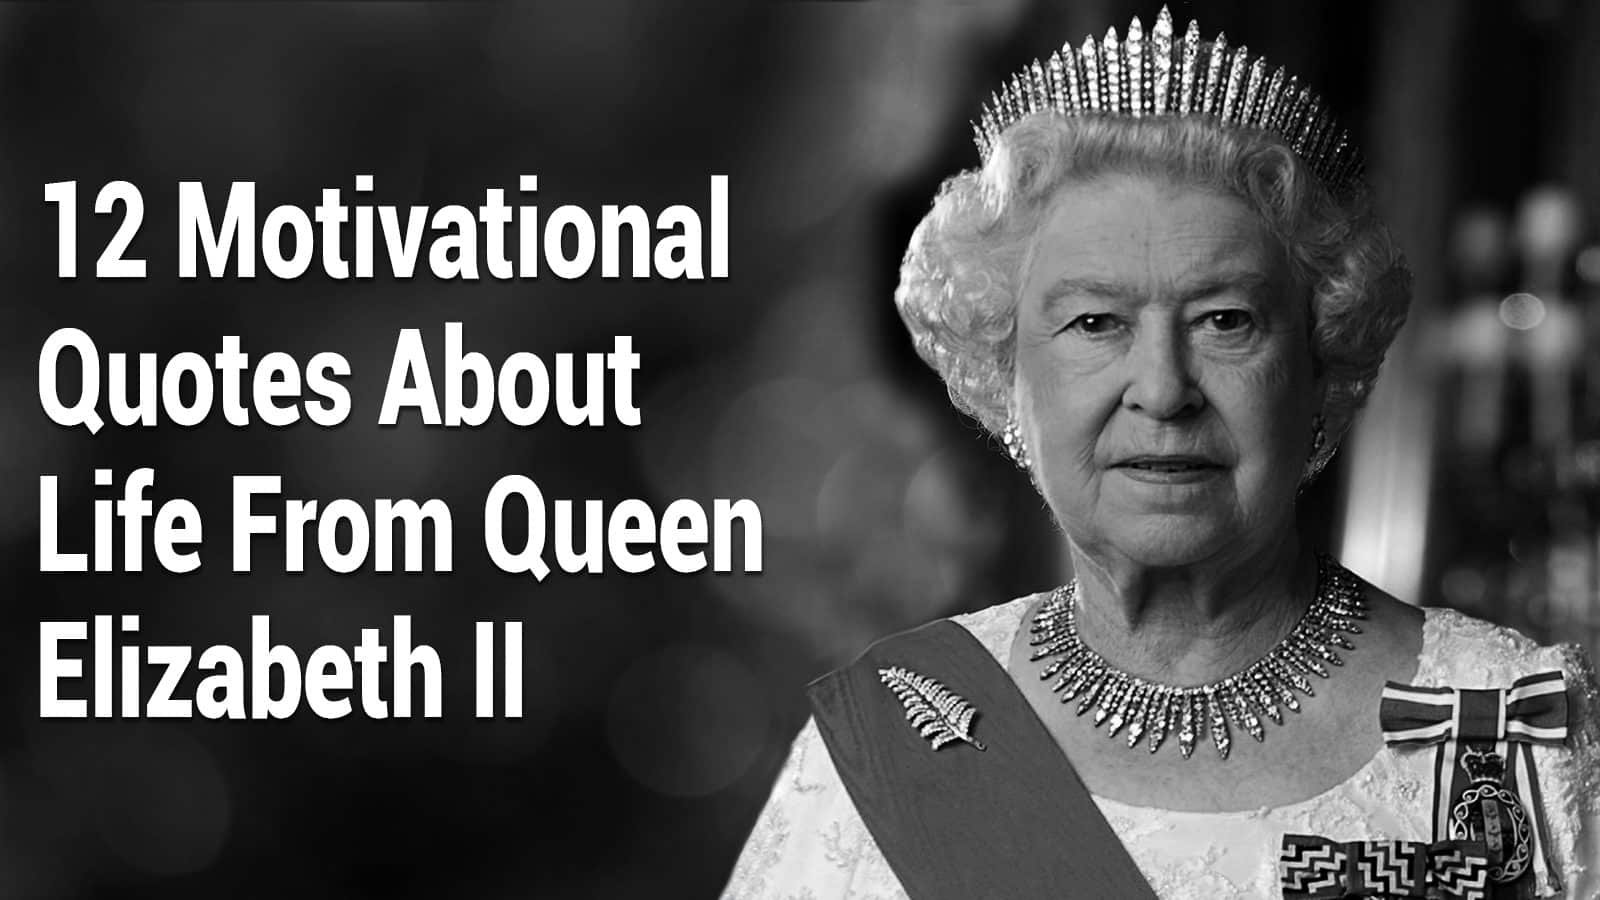 12 Motivational Quotes About Life from Queen Elizabeth II